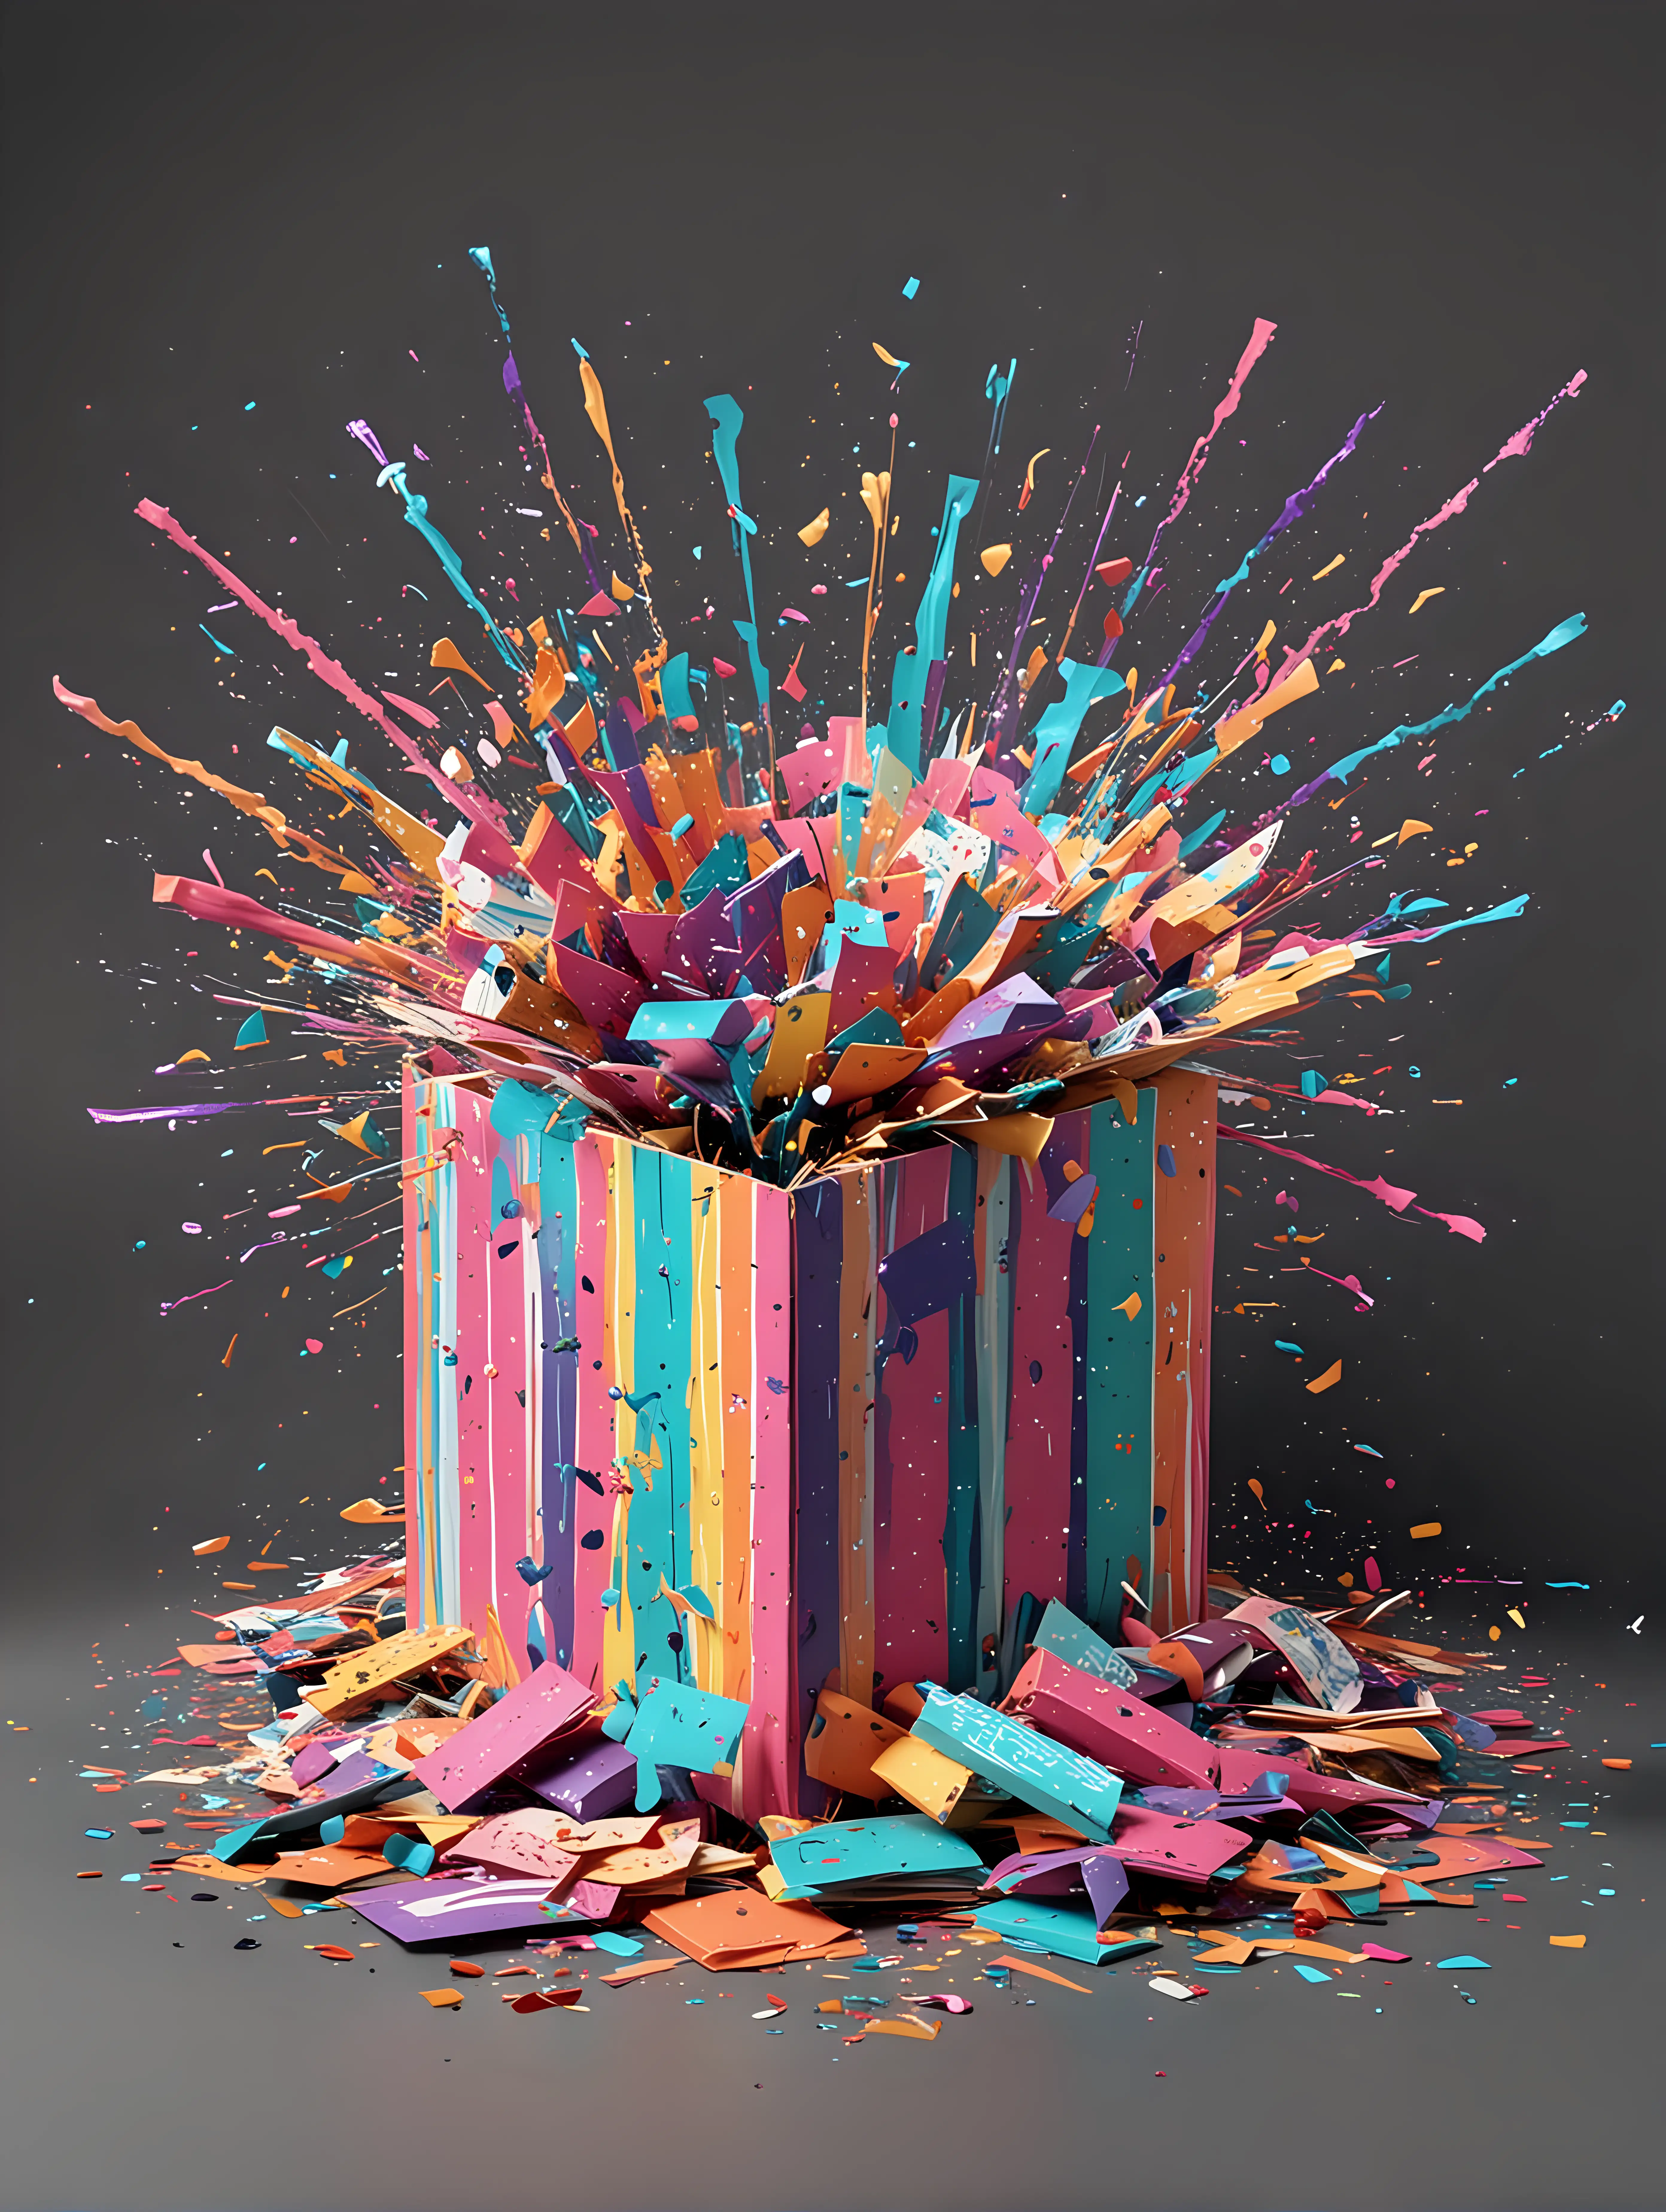 90's style gift box exploding